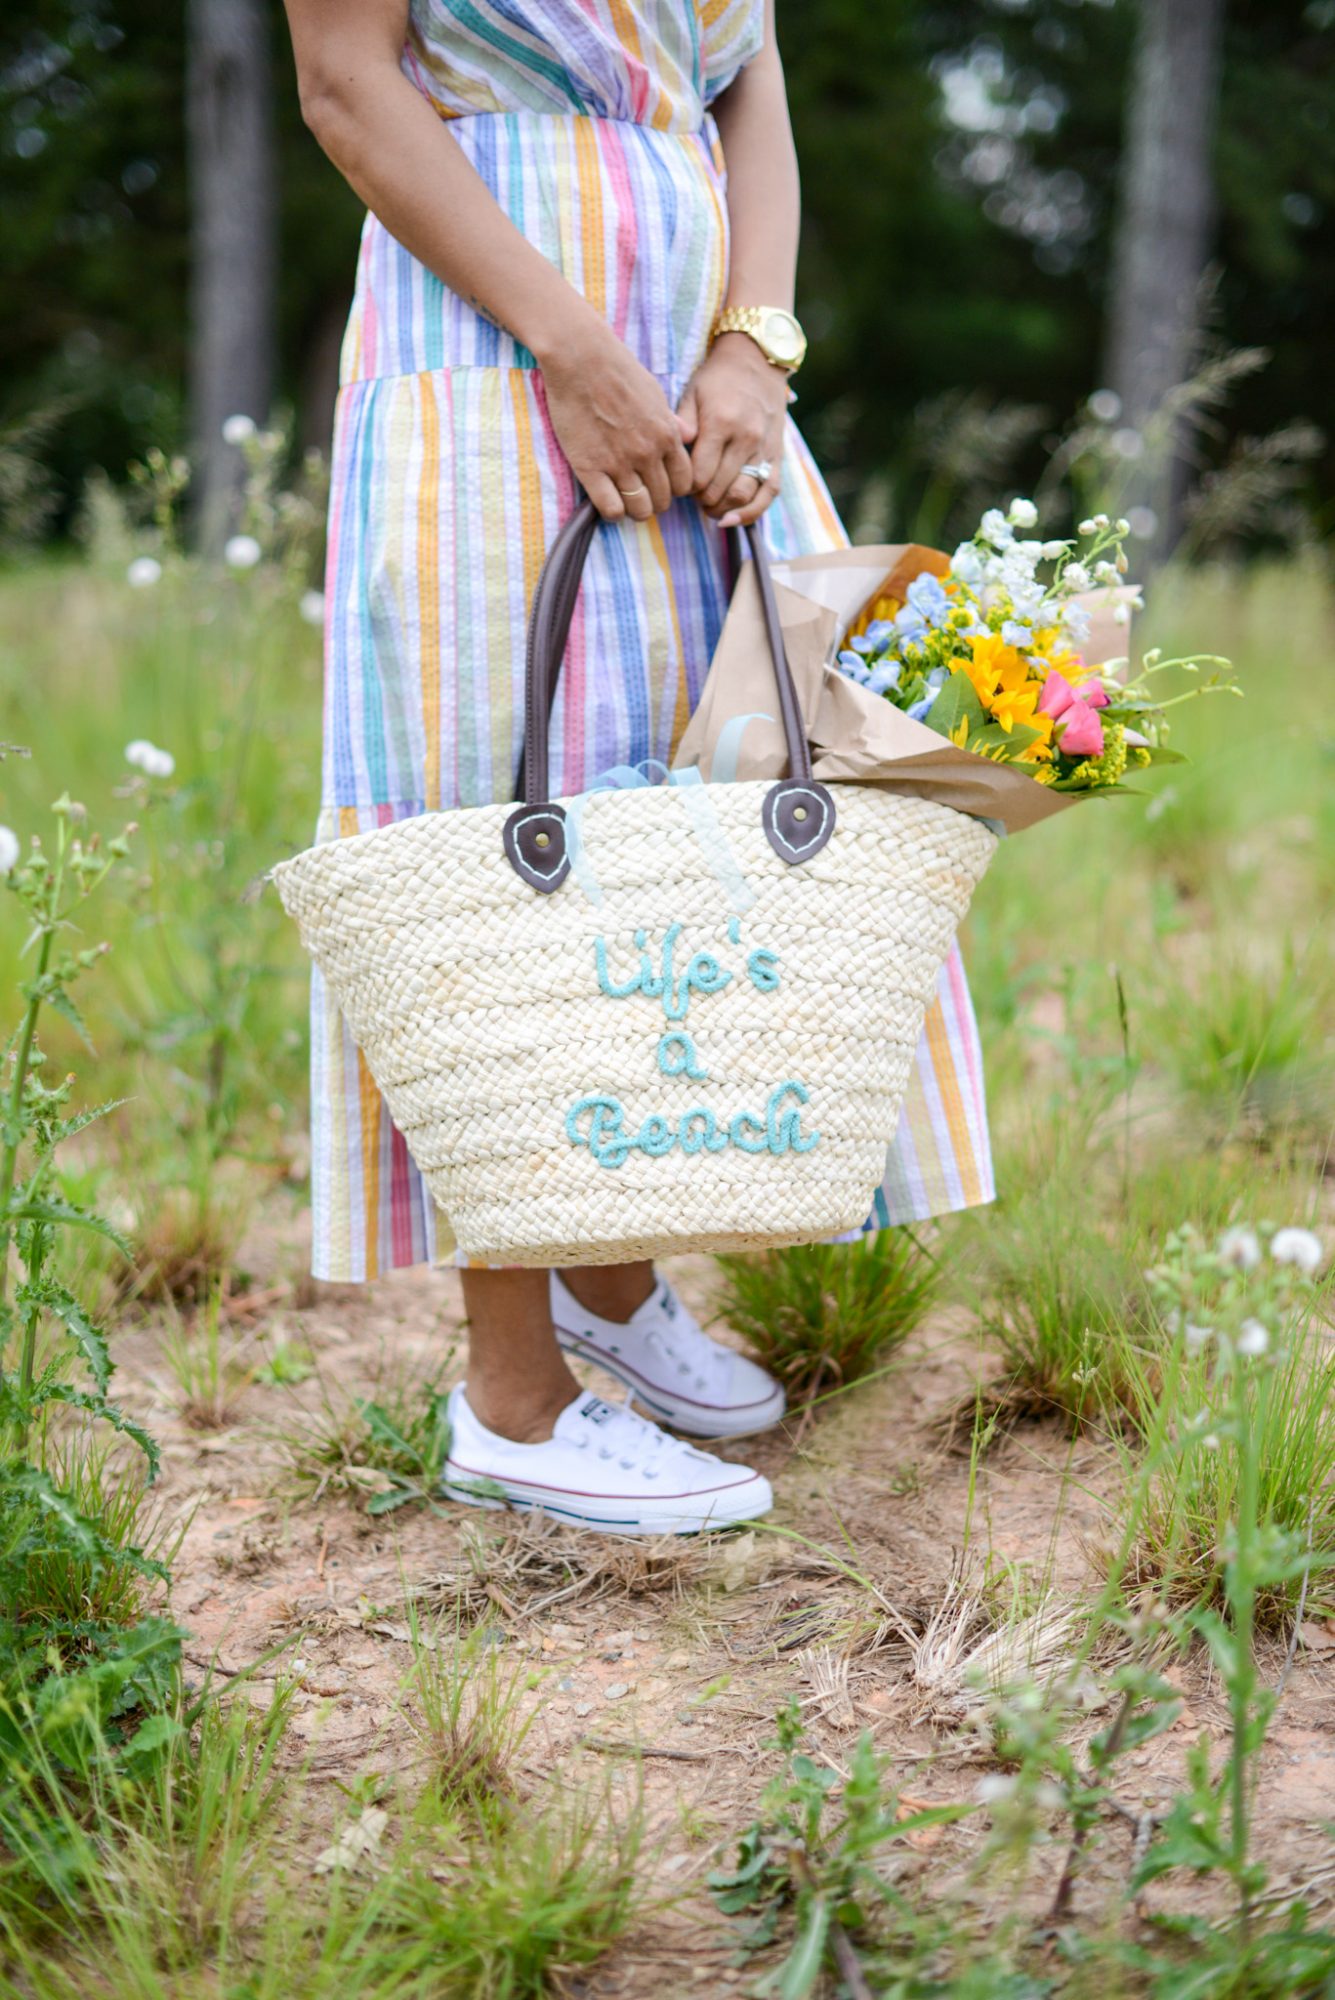 woman wearing colorful dress and holding a bag with flowers Upgrade your Closet for Summer